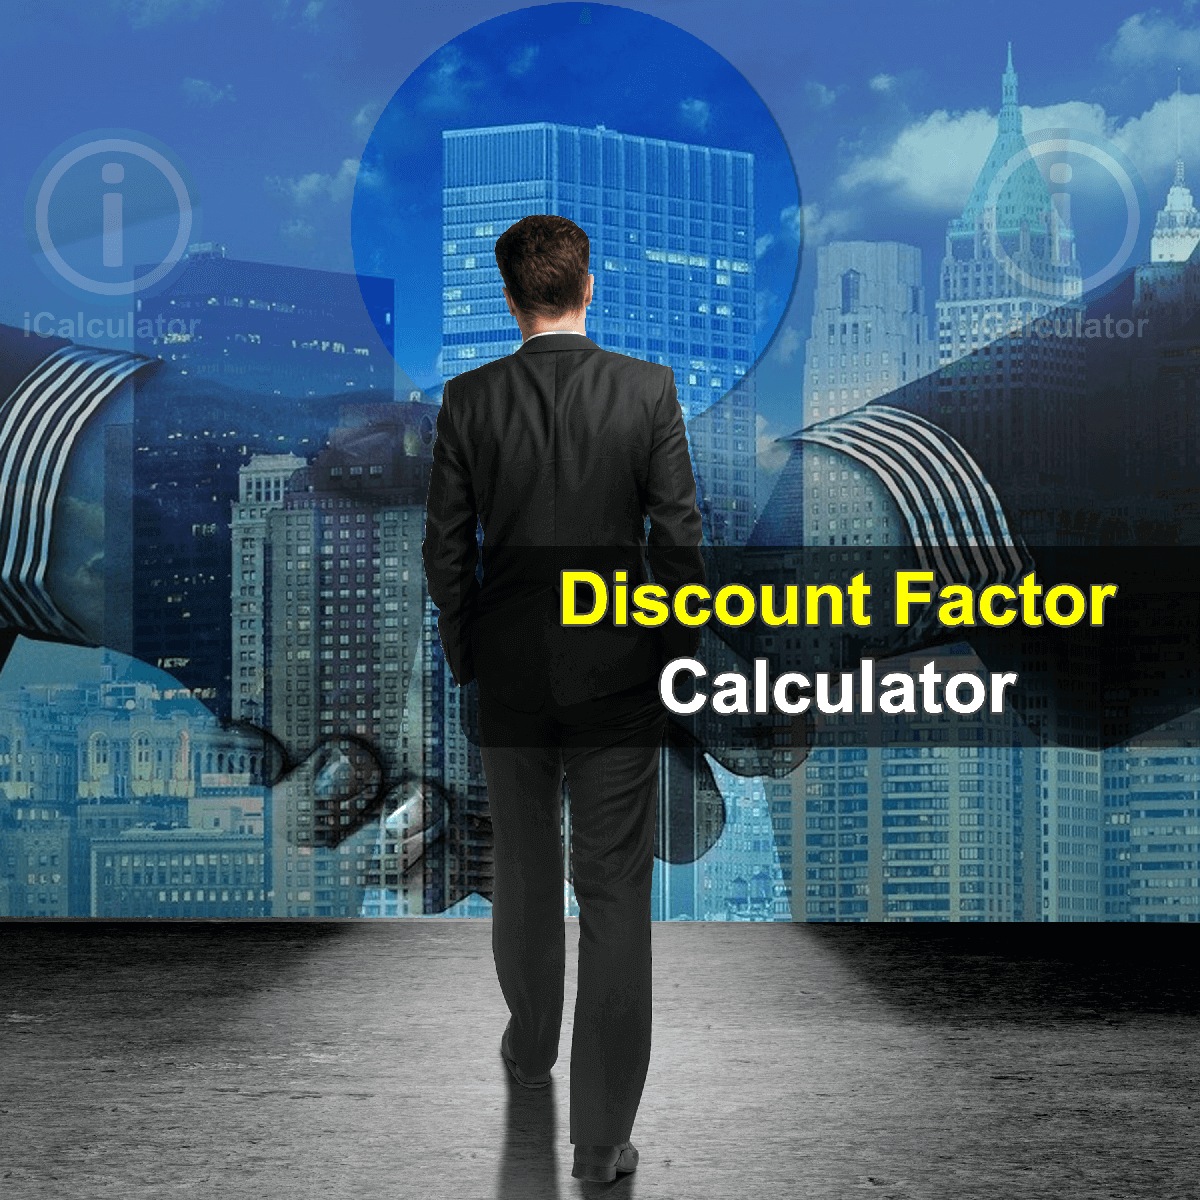 Discount Factor Calculator. This image provides details of how to calculate Discount Factor using a calculator and notepad. By using theDiscount Factor formula, the Discount Factor Calculator provides a true calculation of the value of money changes according to the time difference between present and future and it is created by discounting the future value back to the present value